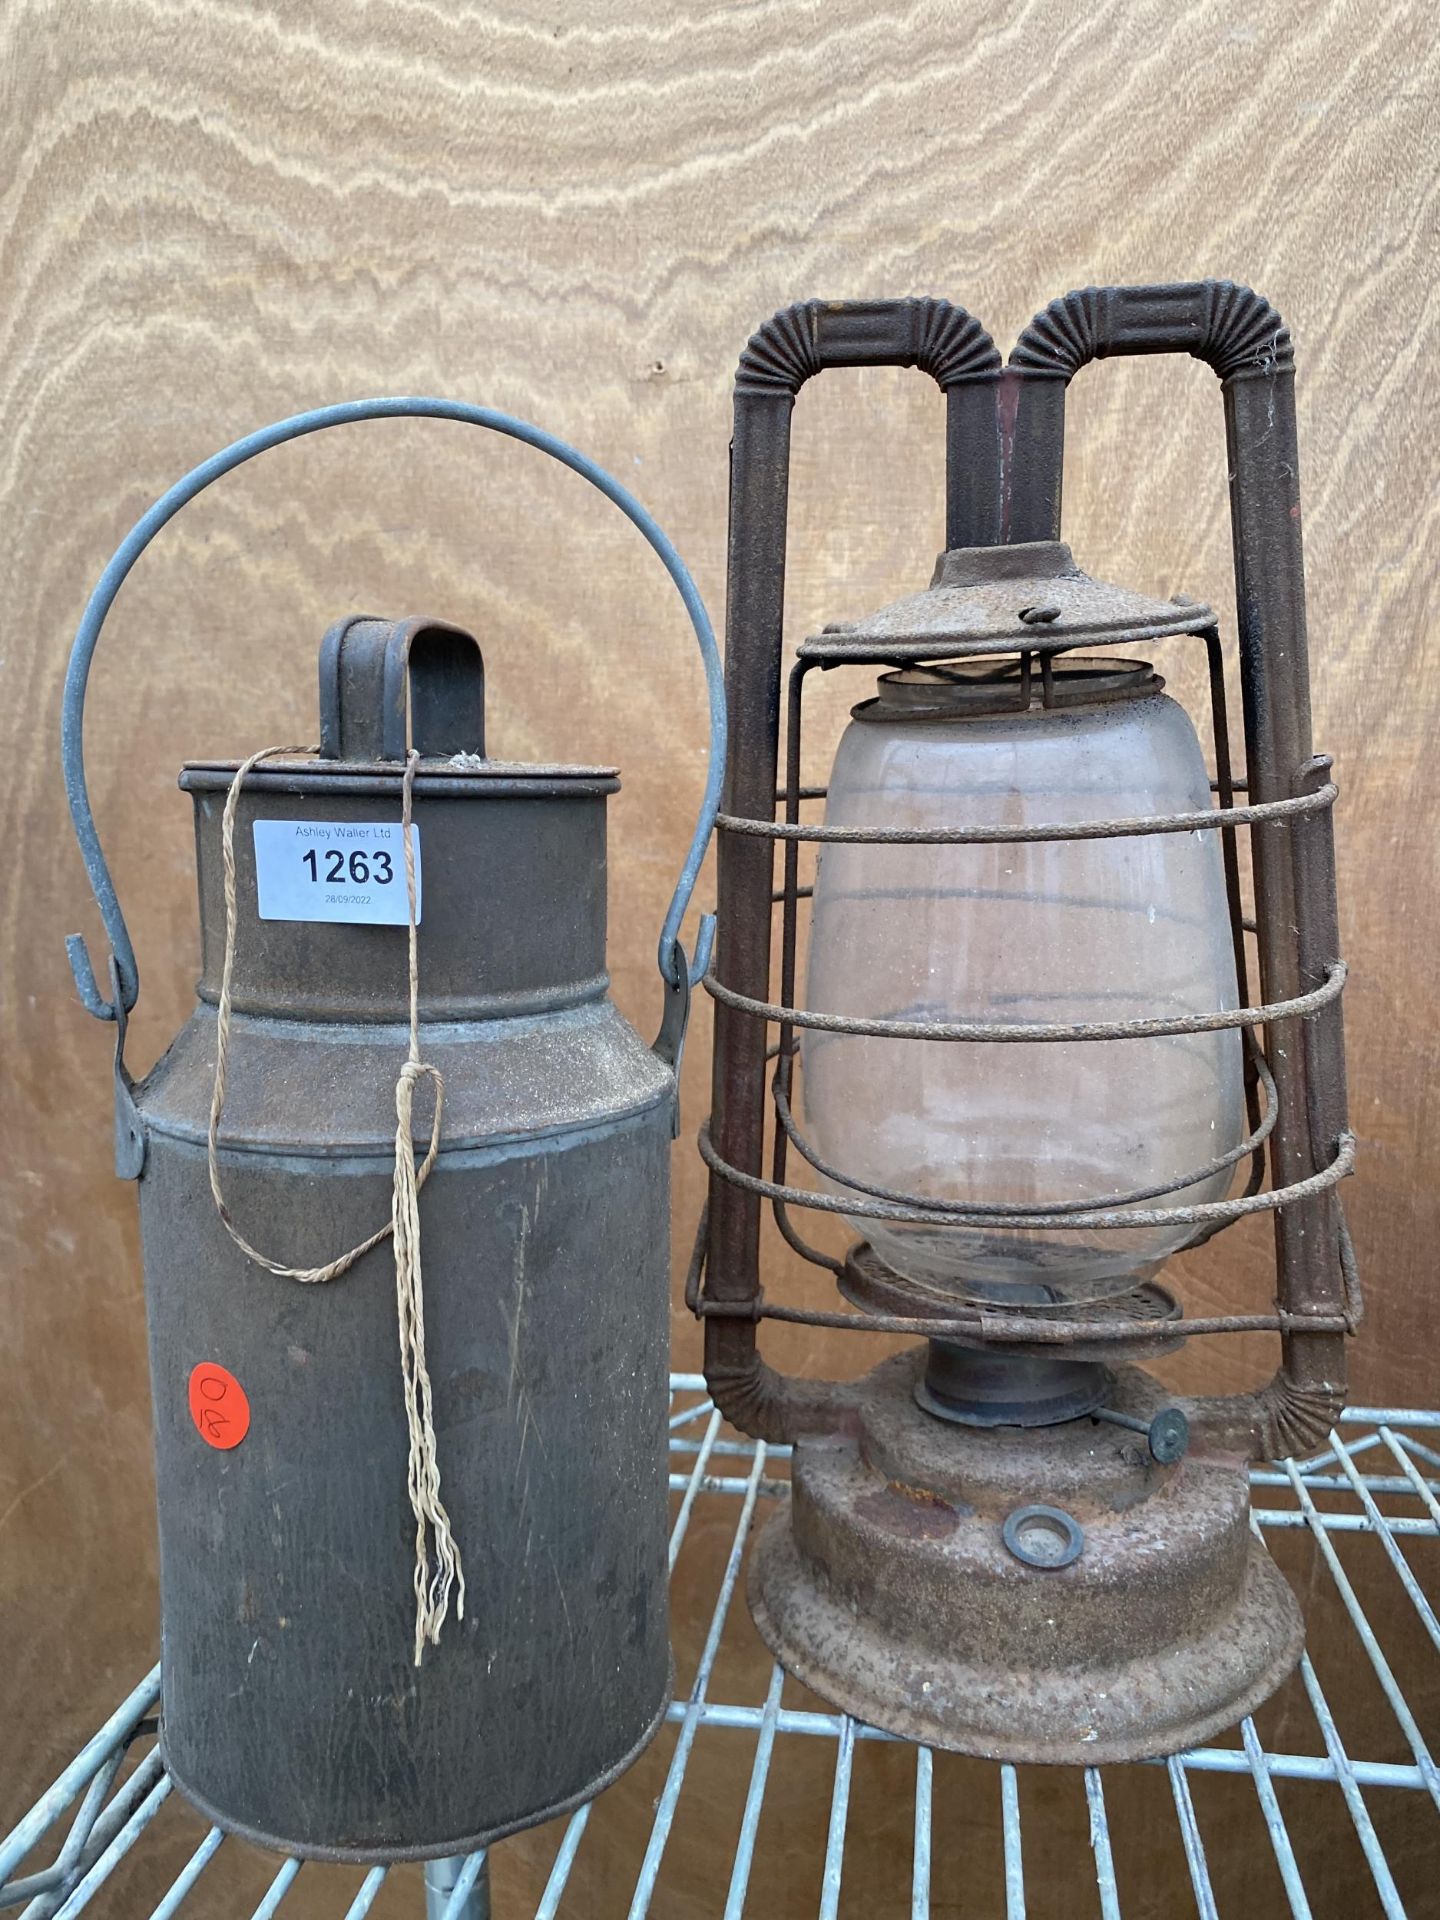 A SMALL VINTAGE MILK CHURN AND A PARAFIN LAMP